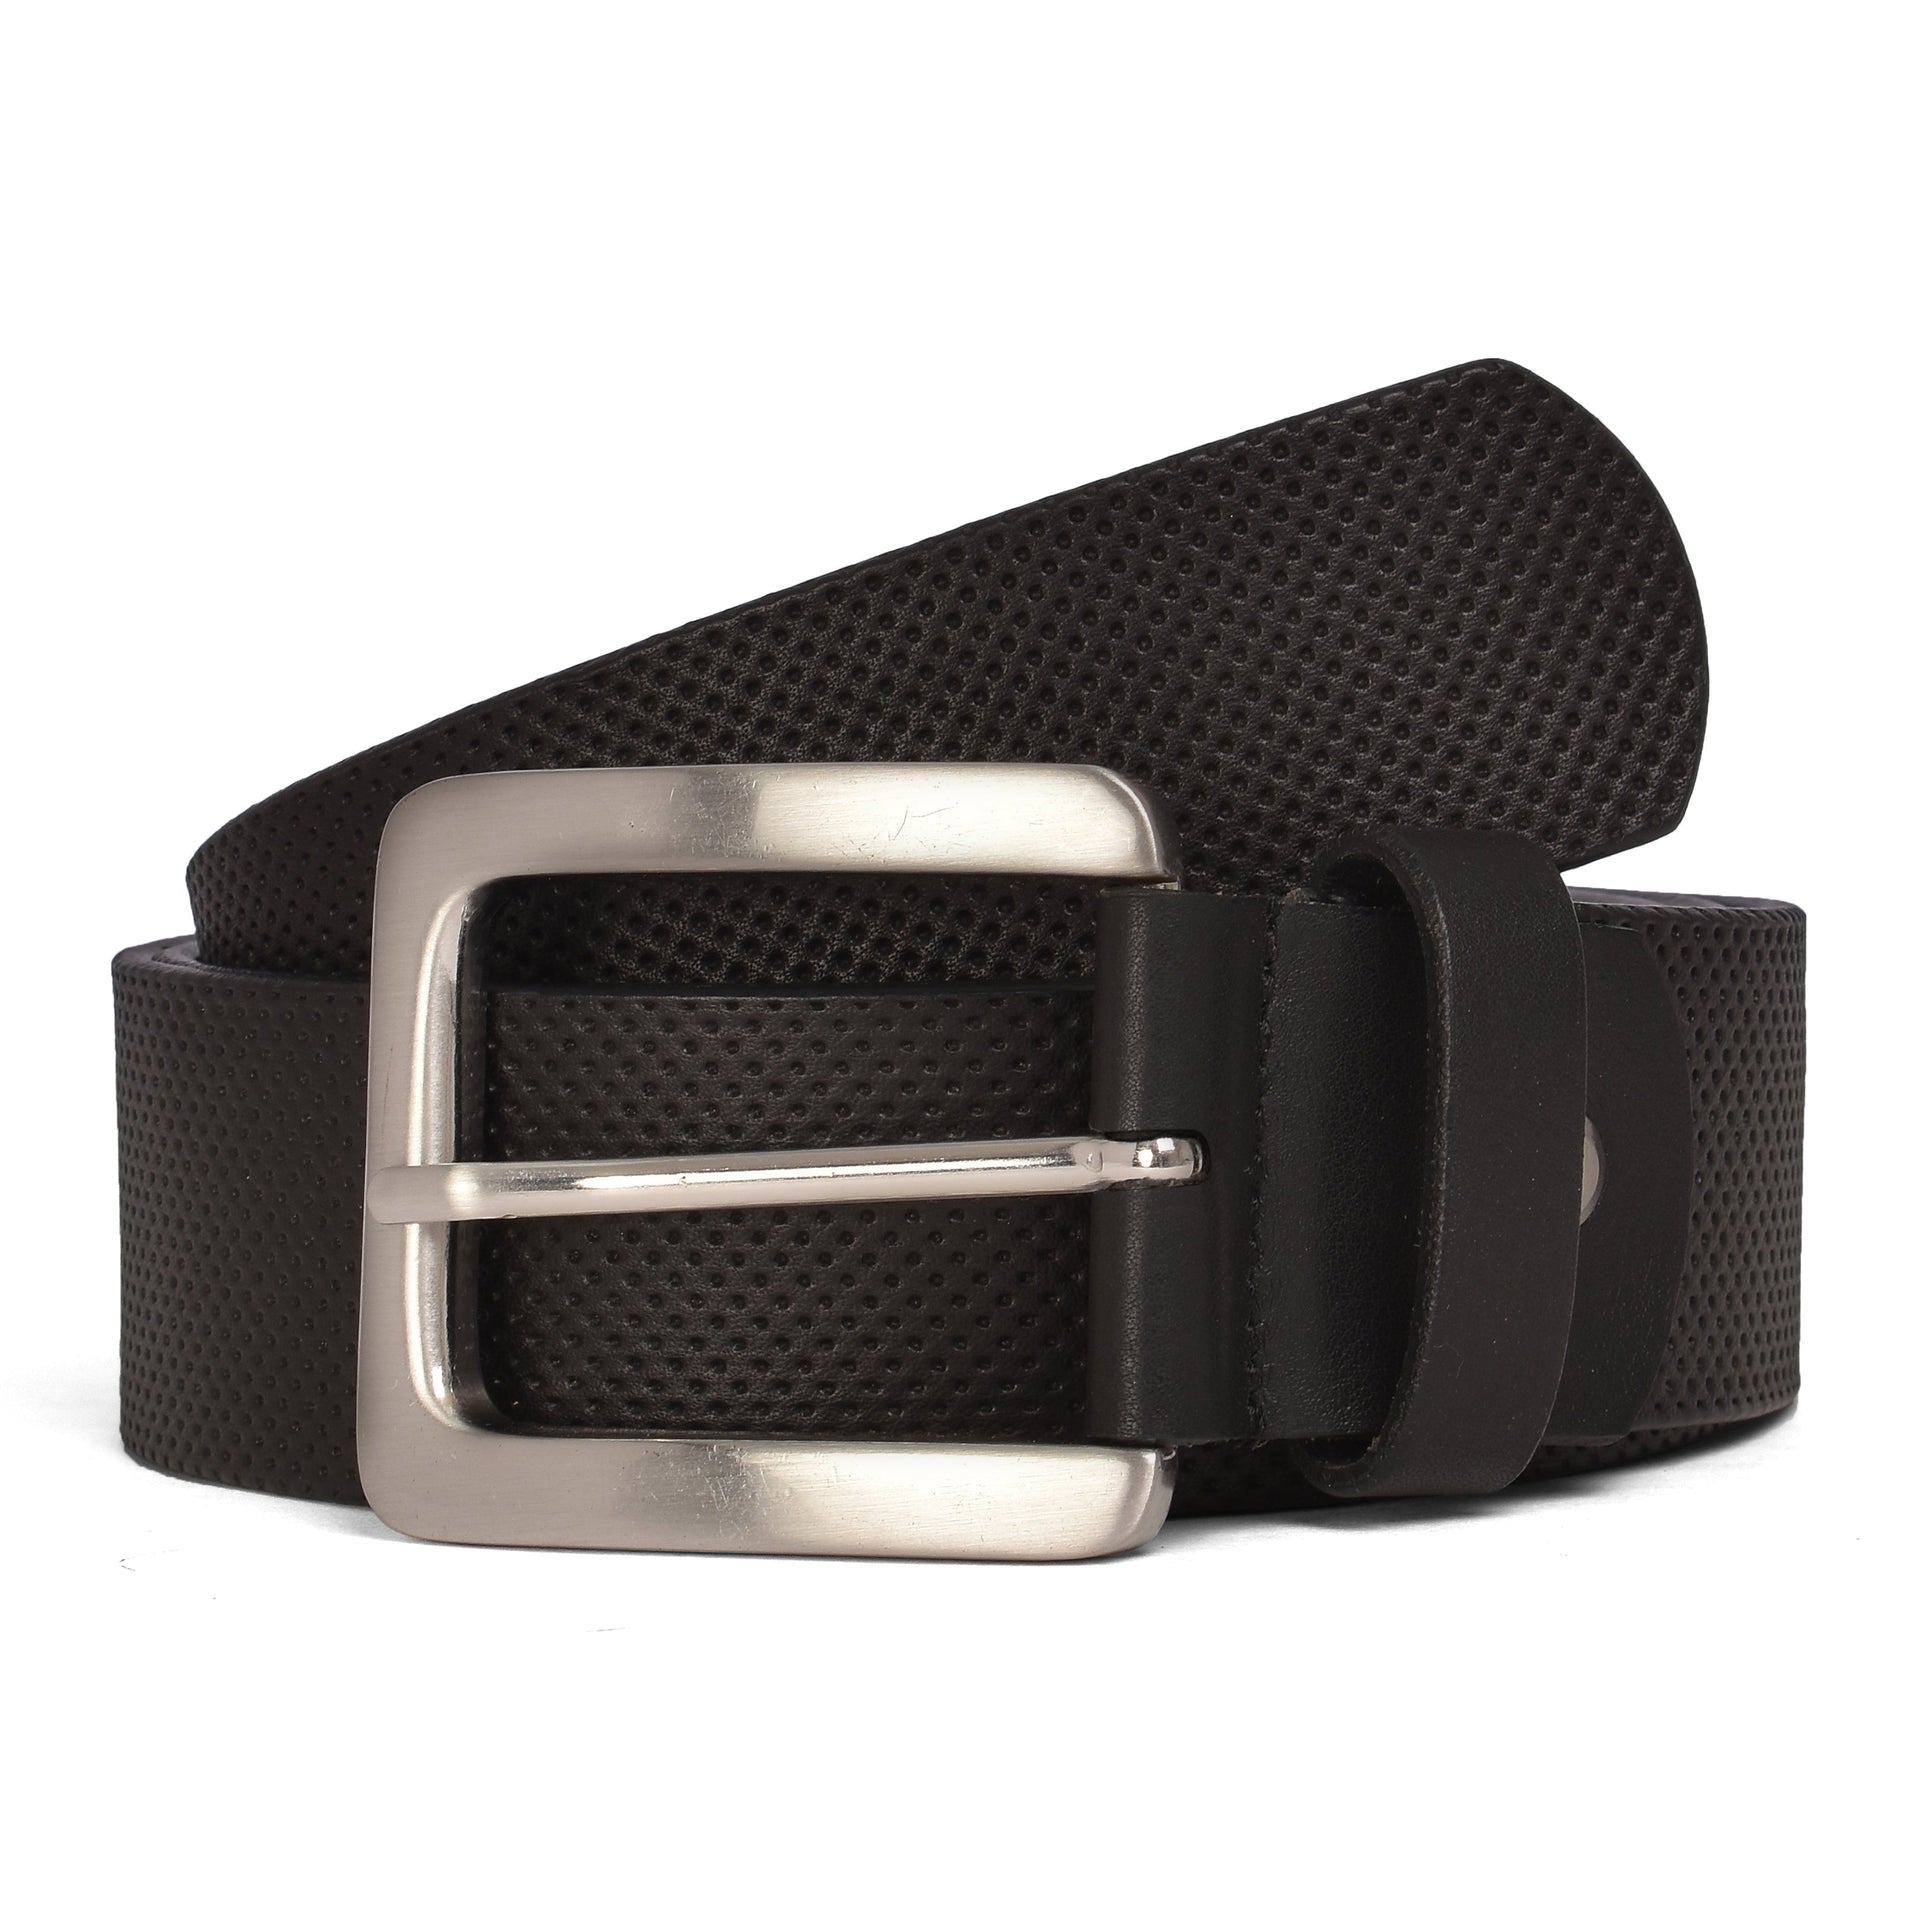 Perforated Casual Belt - Royal Black / 30 inch - 75 cm - 